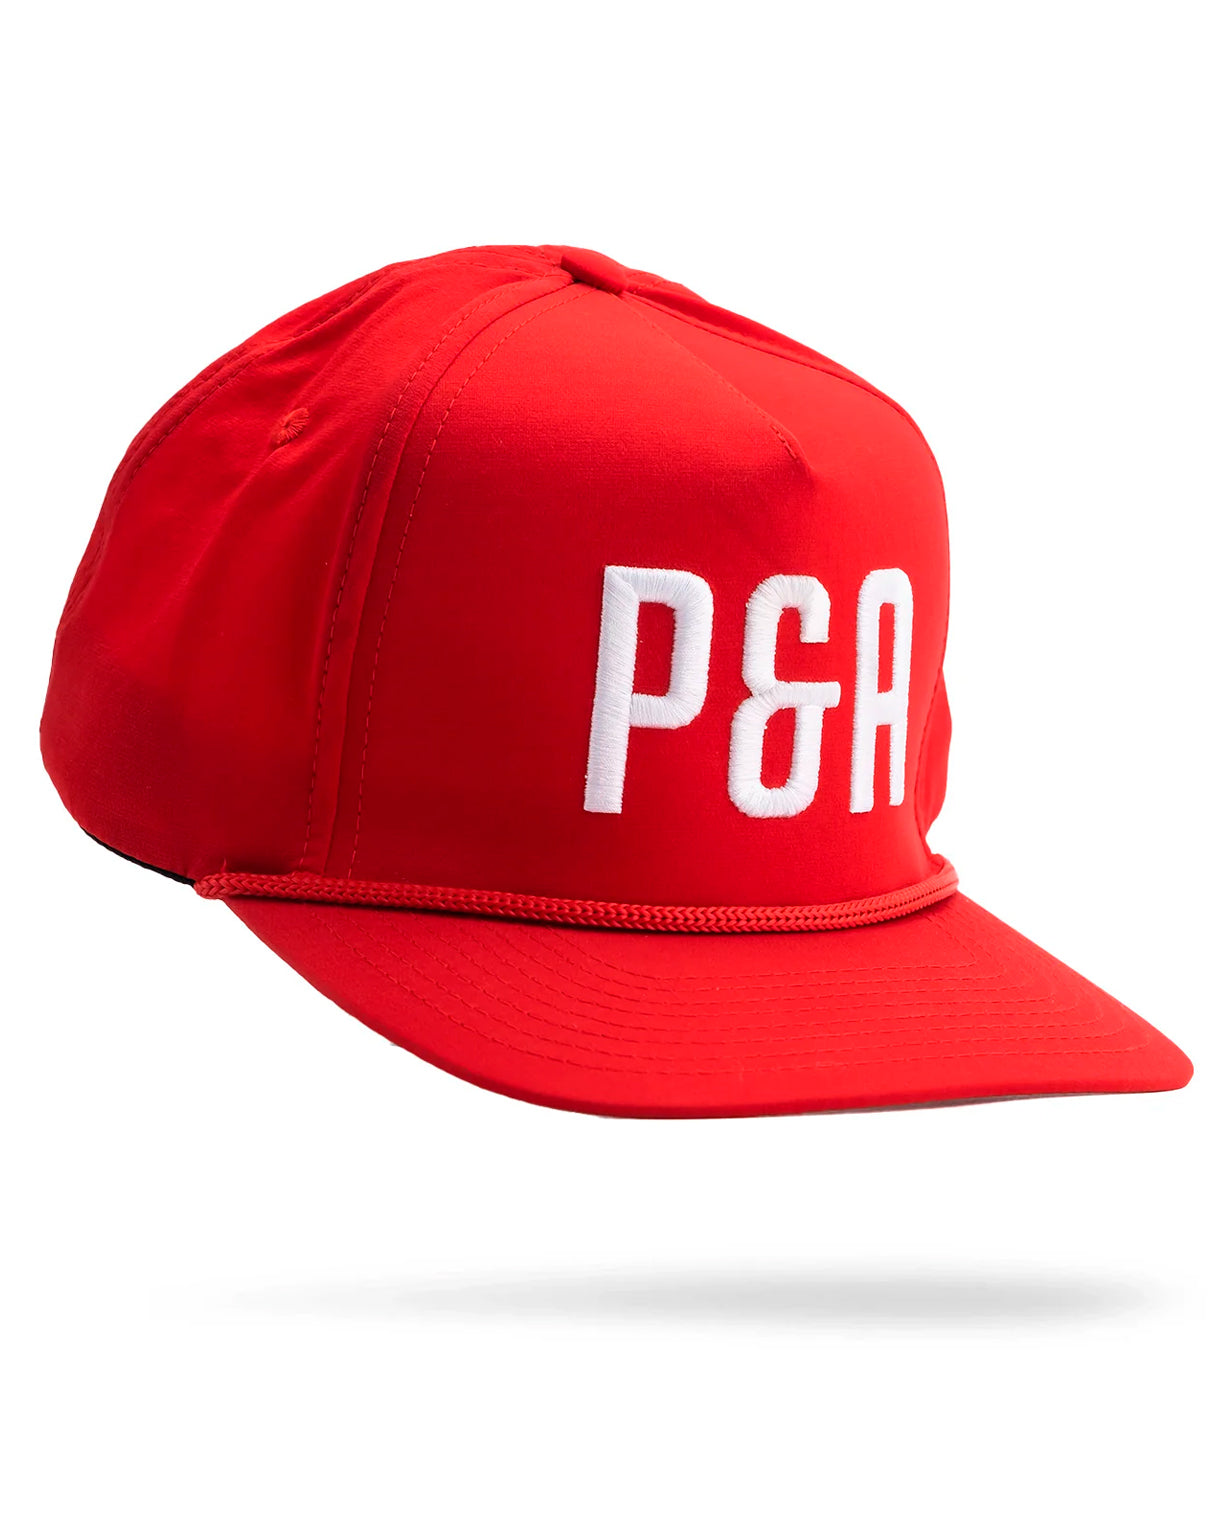 P & A Snapback Rope Hat